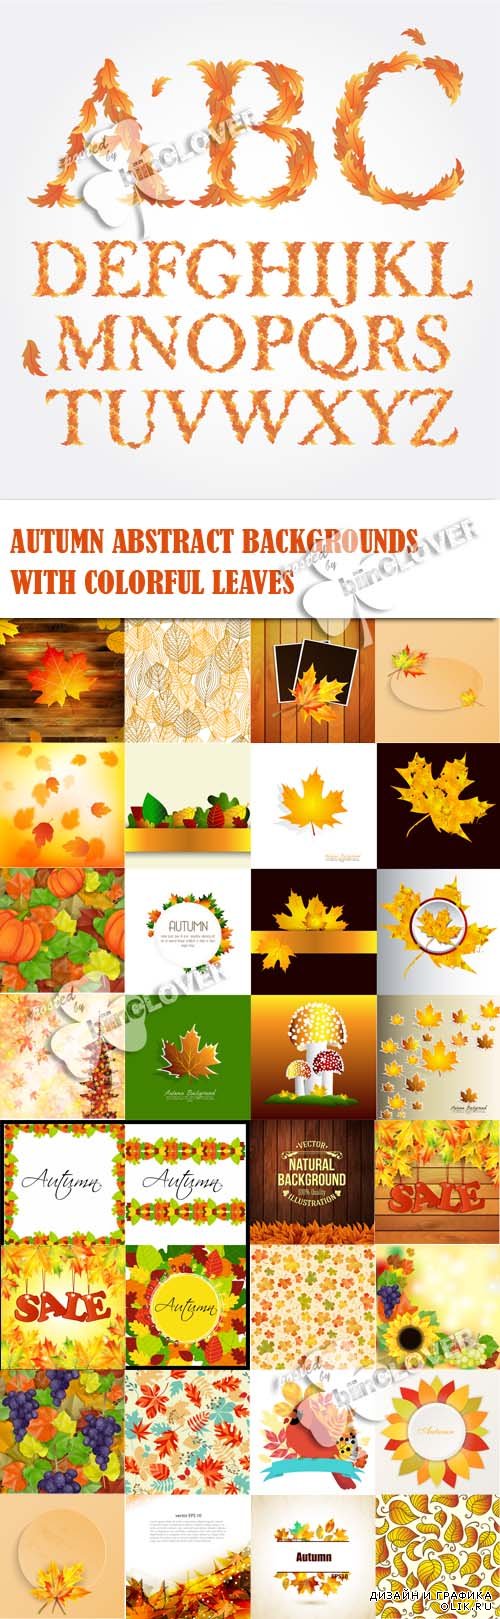 Autumn abstract  backgrounds with colorful leaves 0595